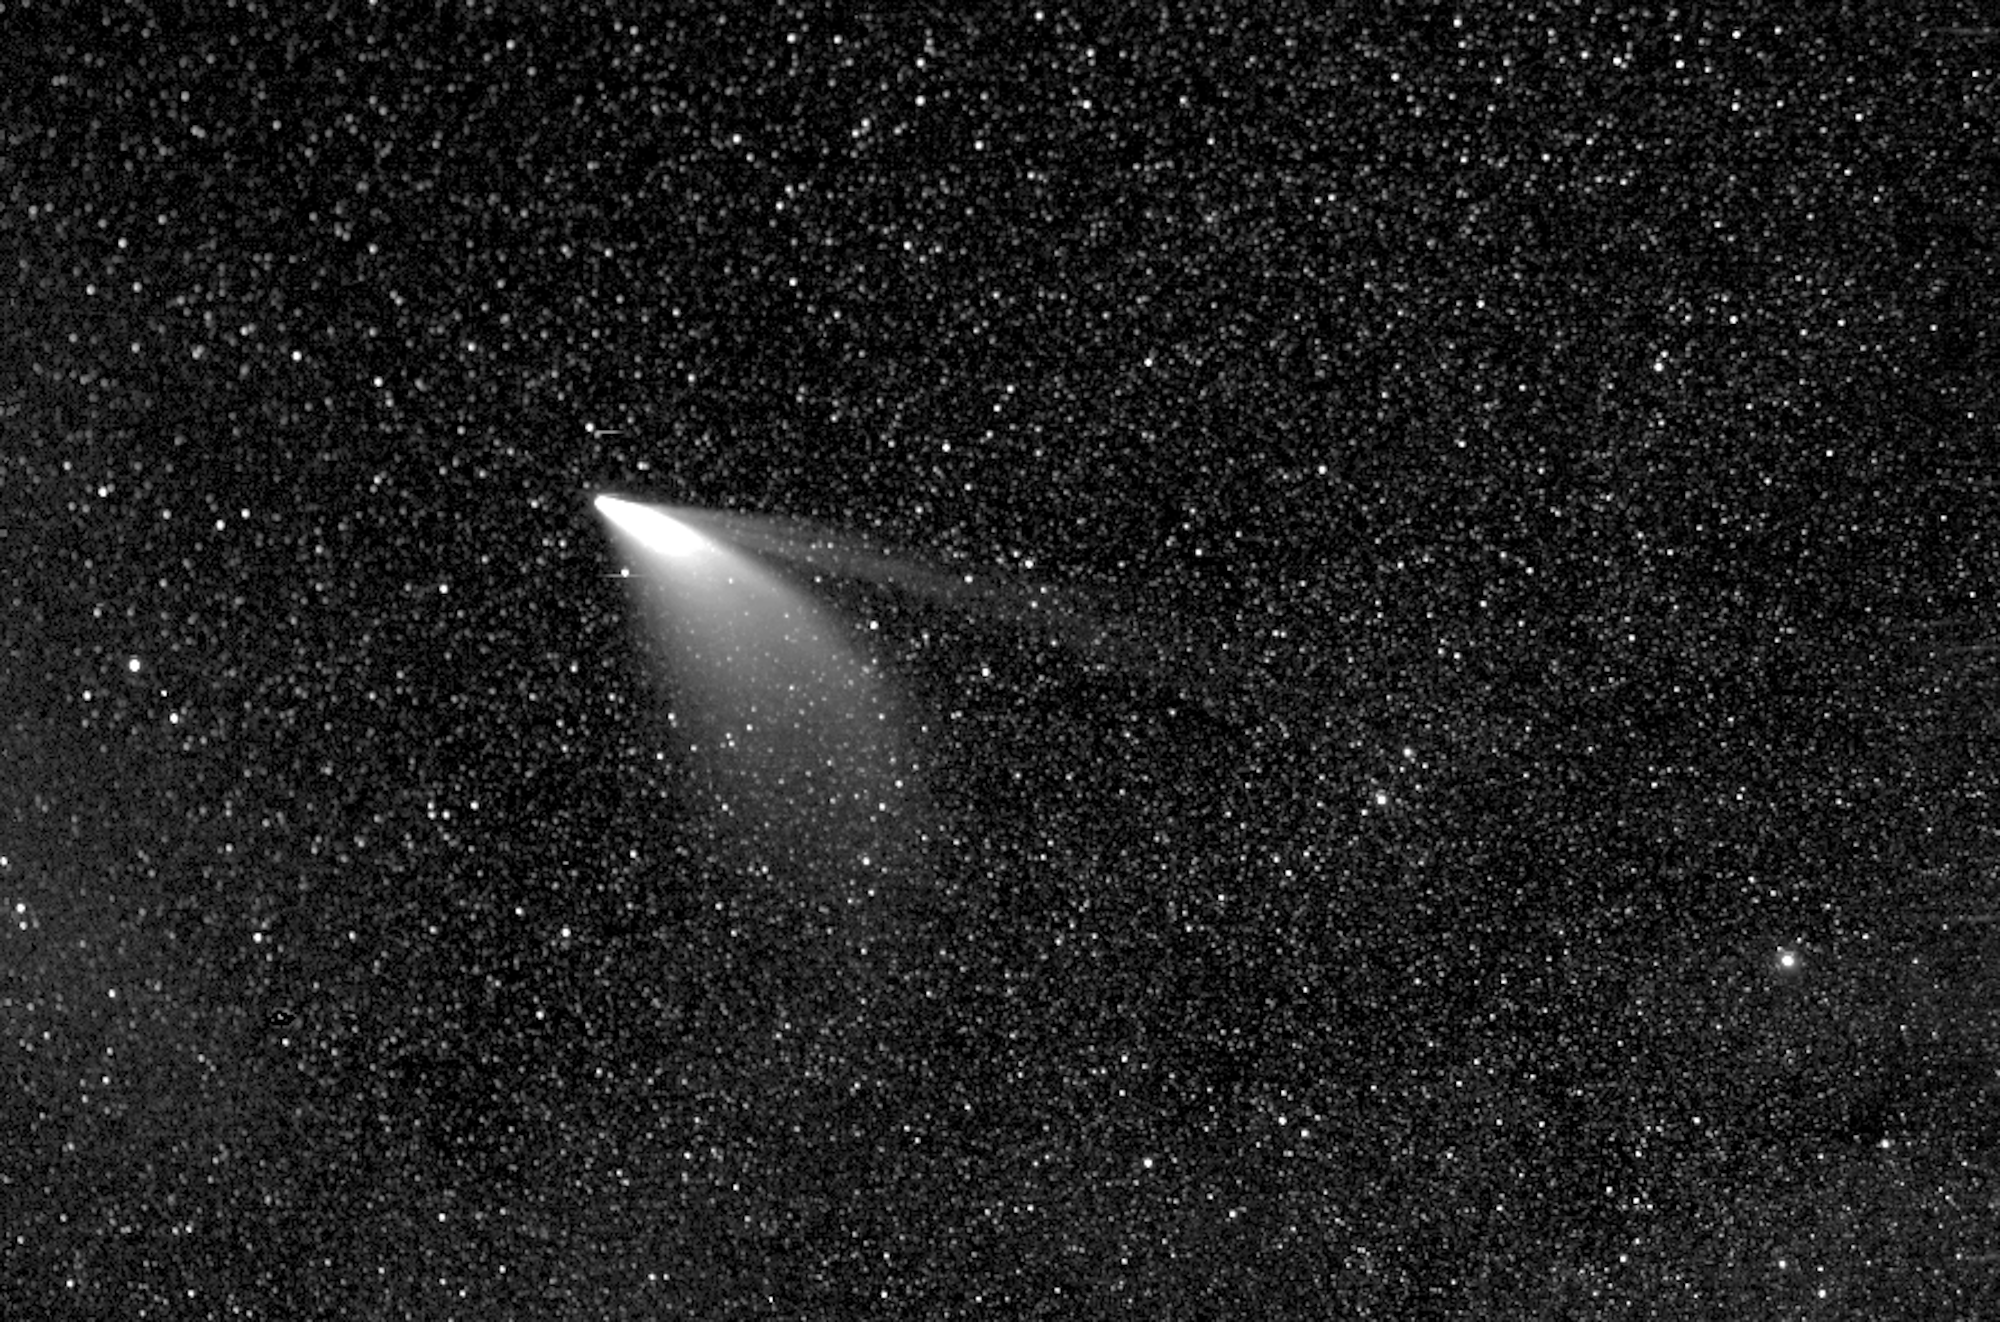 Comet NEOWISE appears against a backdrop teeming with stars in this processed image